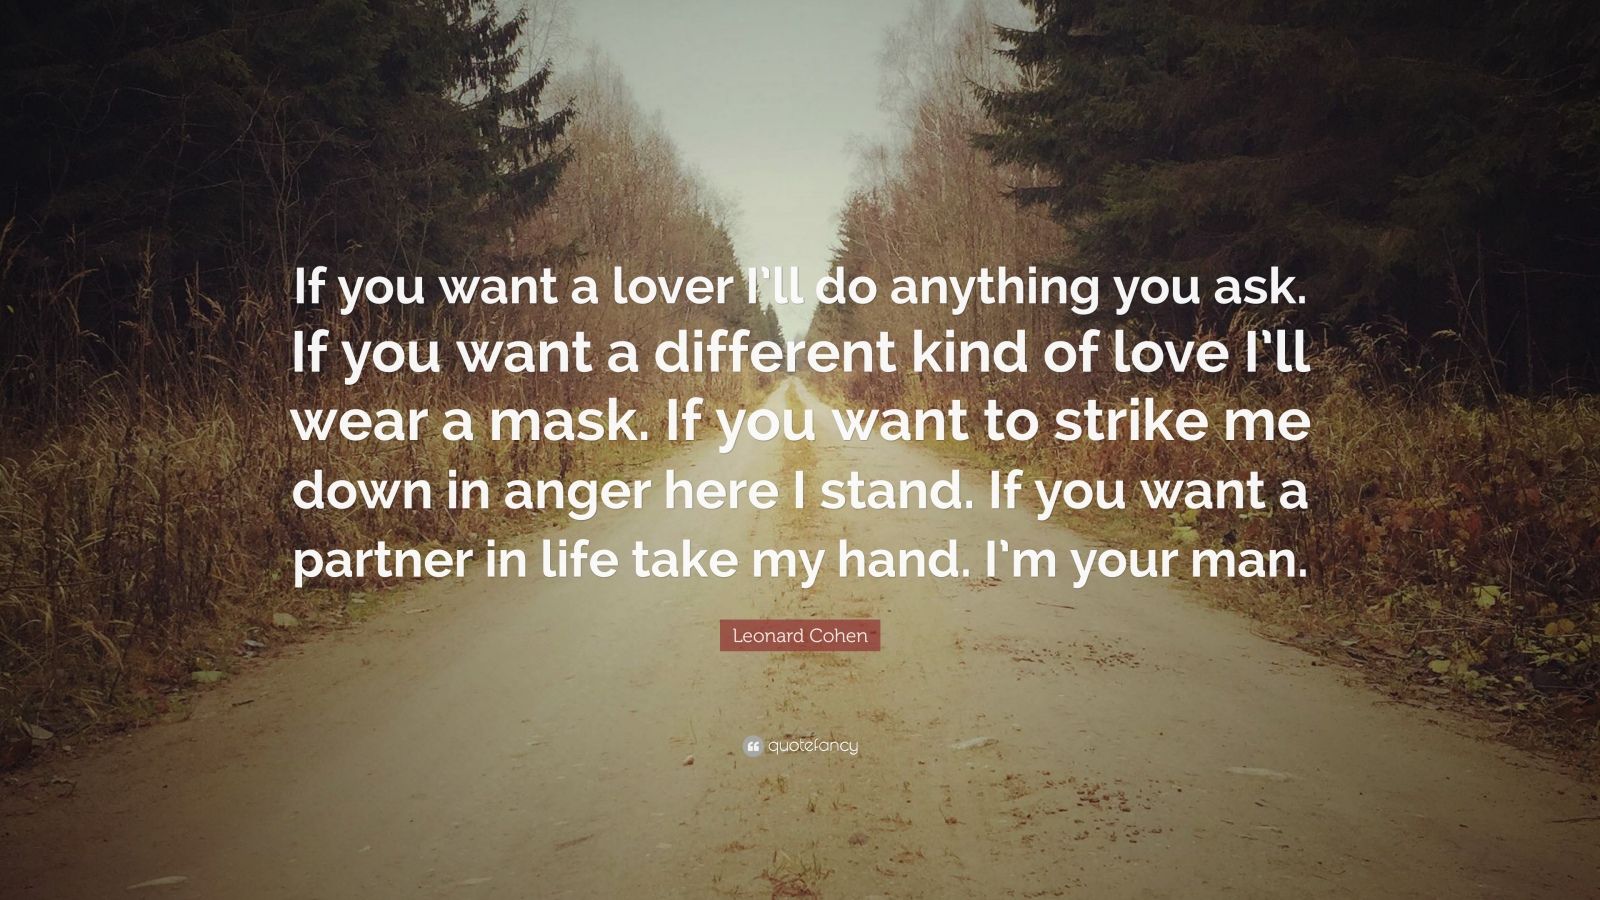 Leonard Cohen Quote: “If you want a lover I’ll do anything you ask. If